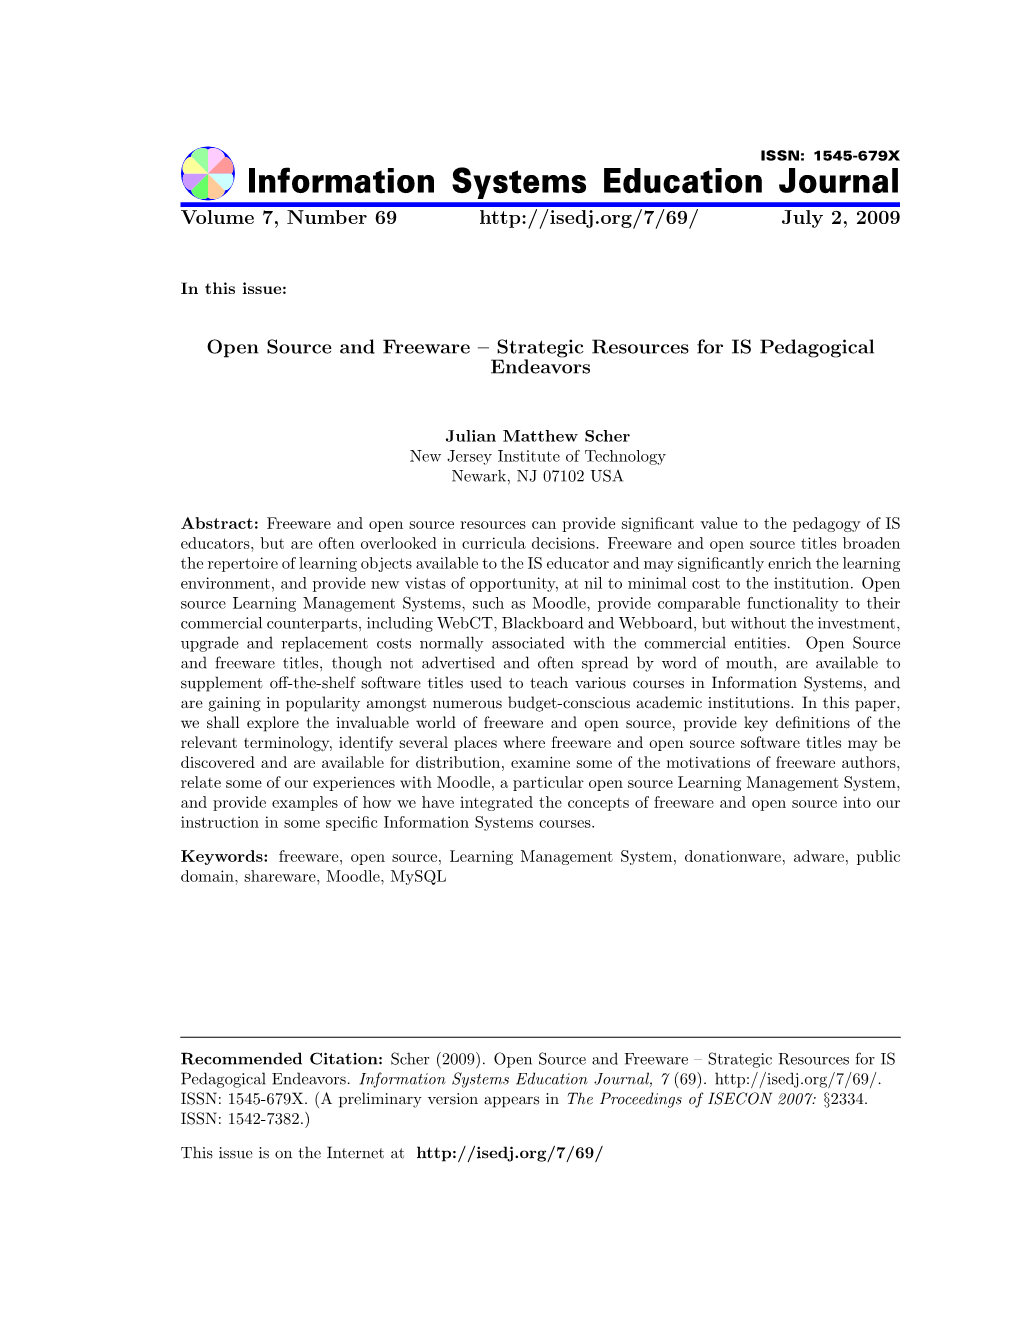 Open Source and Freeware–Strategic Resources for IS Pedagogical